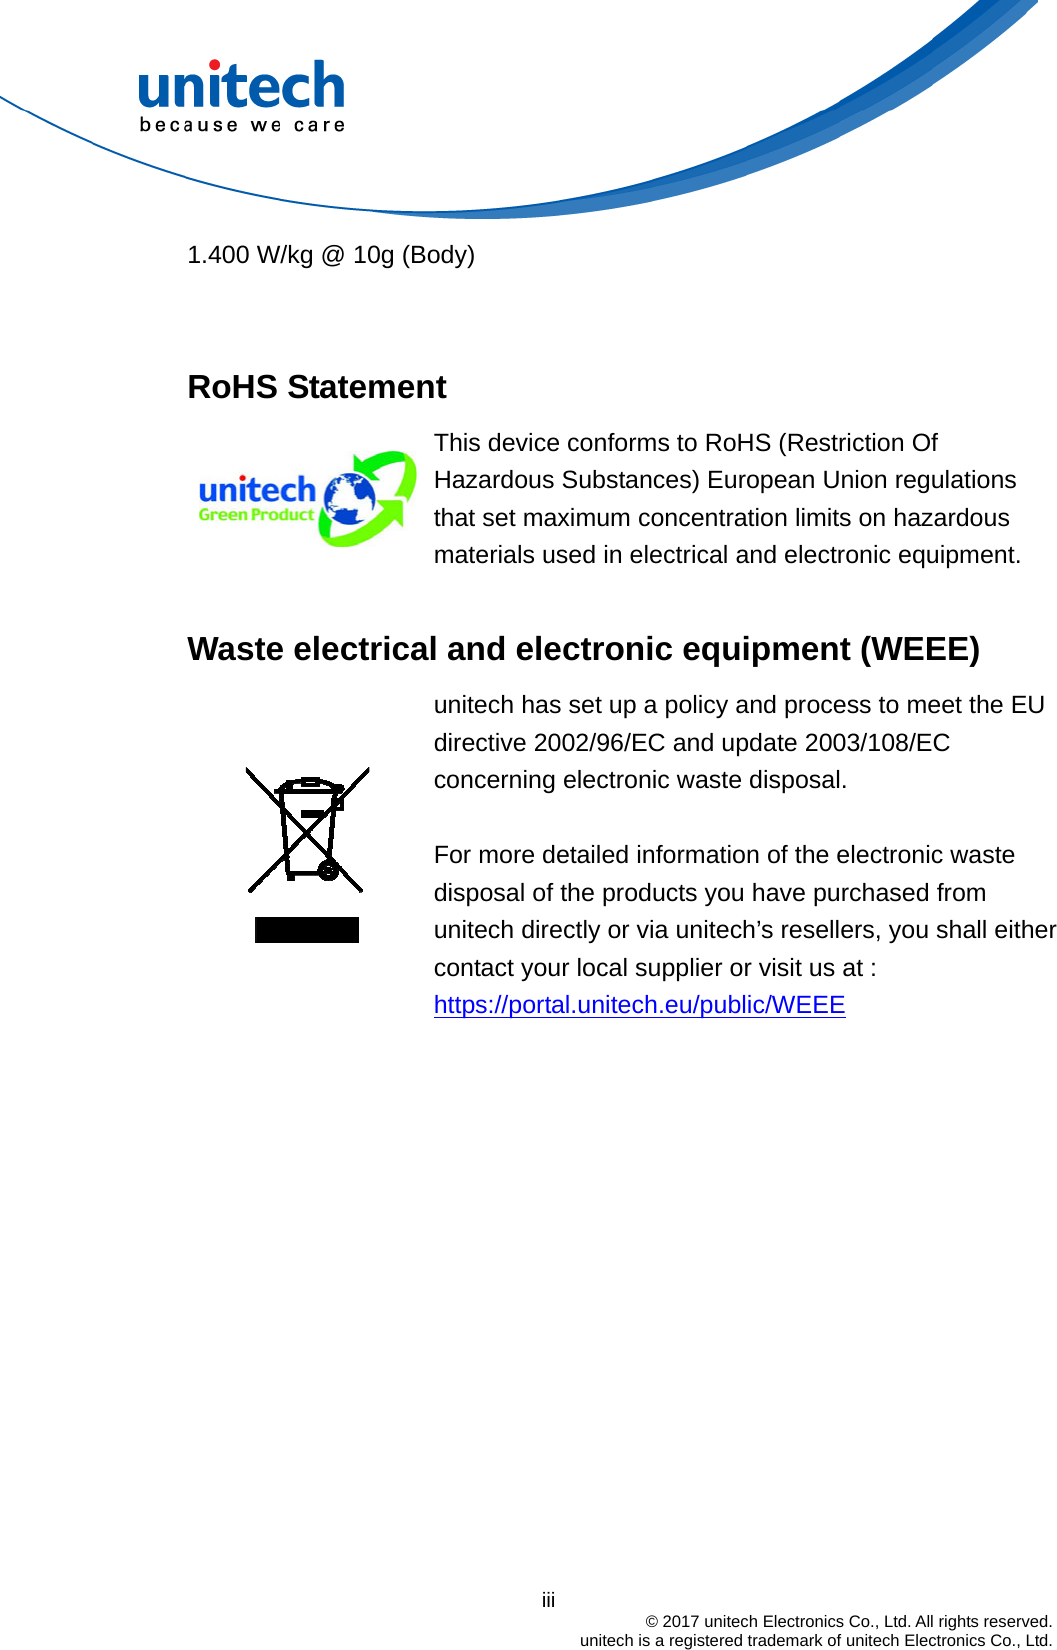                                          iii  © 2017 unitech Electronics Co., Ltd. All rights reserved.   unitech is a registered trademark of unitech Electronics Co., Ltd. 1.400 W/kg @ 10g (Body)   RoHS Statement  This device conforms to RoHS (Restriction Of Hazardous Substances) European Union regulations that set maximum concentration limits on hazardous materials used in electrical and electronic equipment.  Waste electrical and electronic equipment (WEEE)   unitech has set up a policy and process to meet the EU directive 2002/96/EC and update 2003/108/EC concerning electronic waste disposal.    For more detailed information of the electronic waste disposal of the products you have purchased from unitech directly or via unitech’s resellers, you shall either contact your local supplier or visit us at :     https://portal.unitech.eu/public/WEEE 